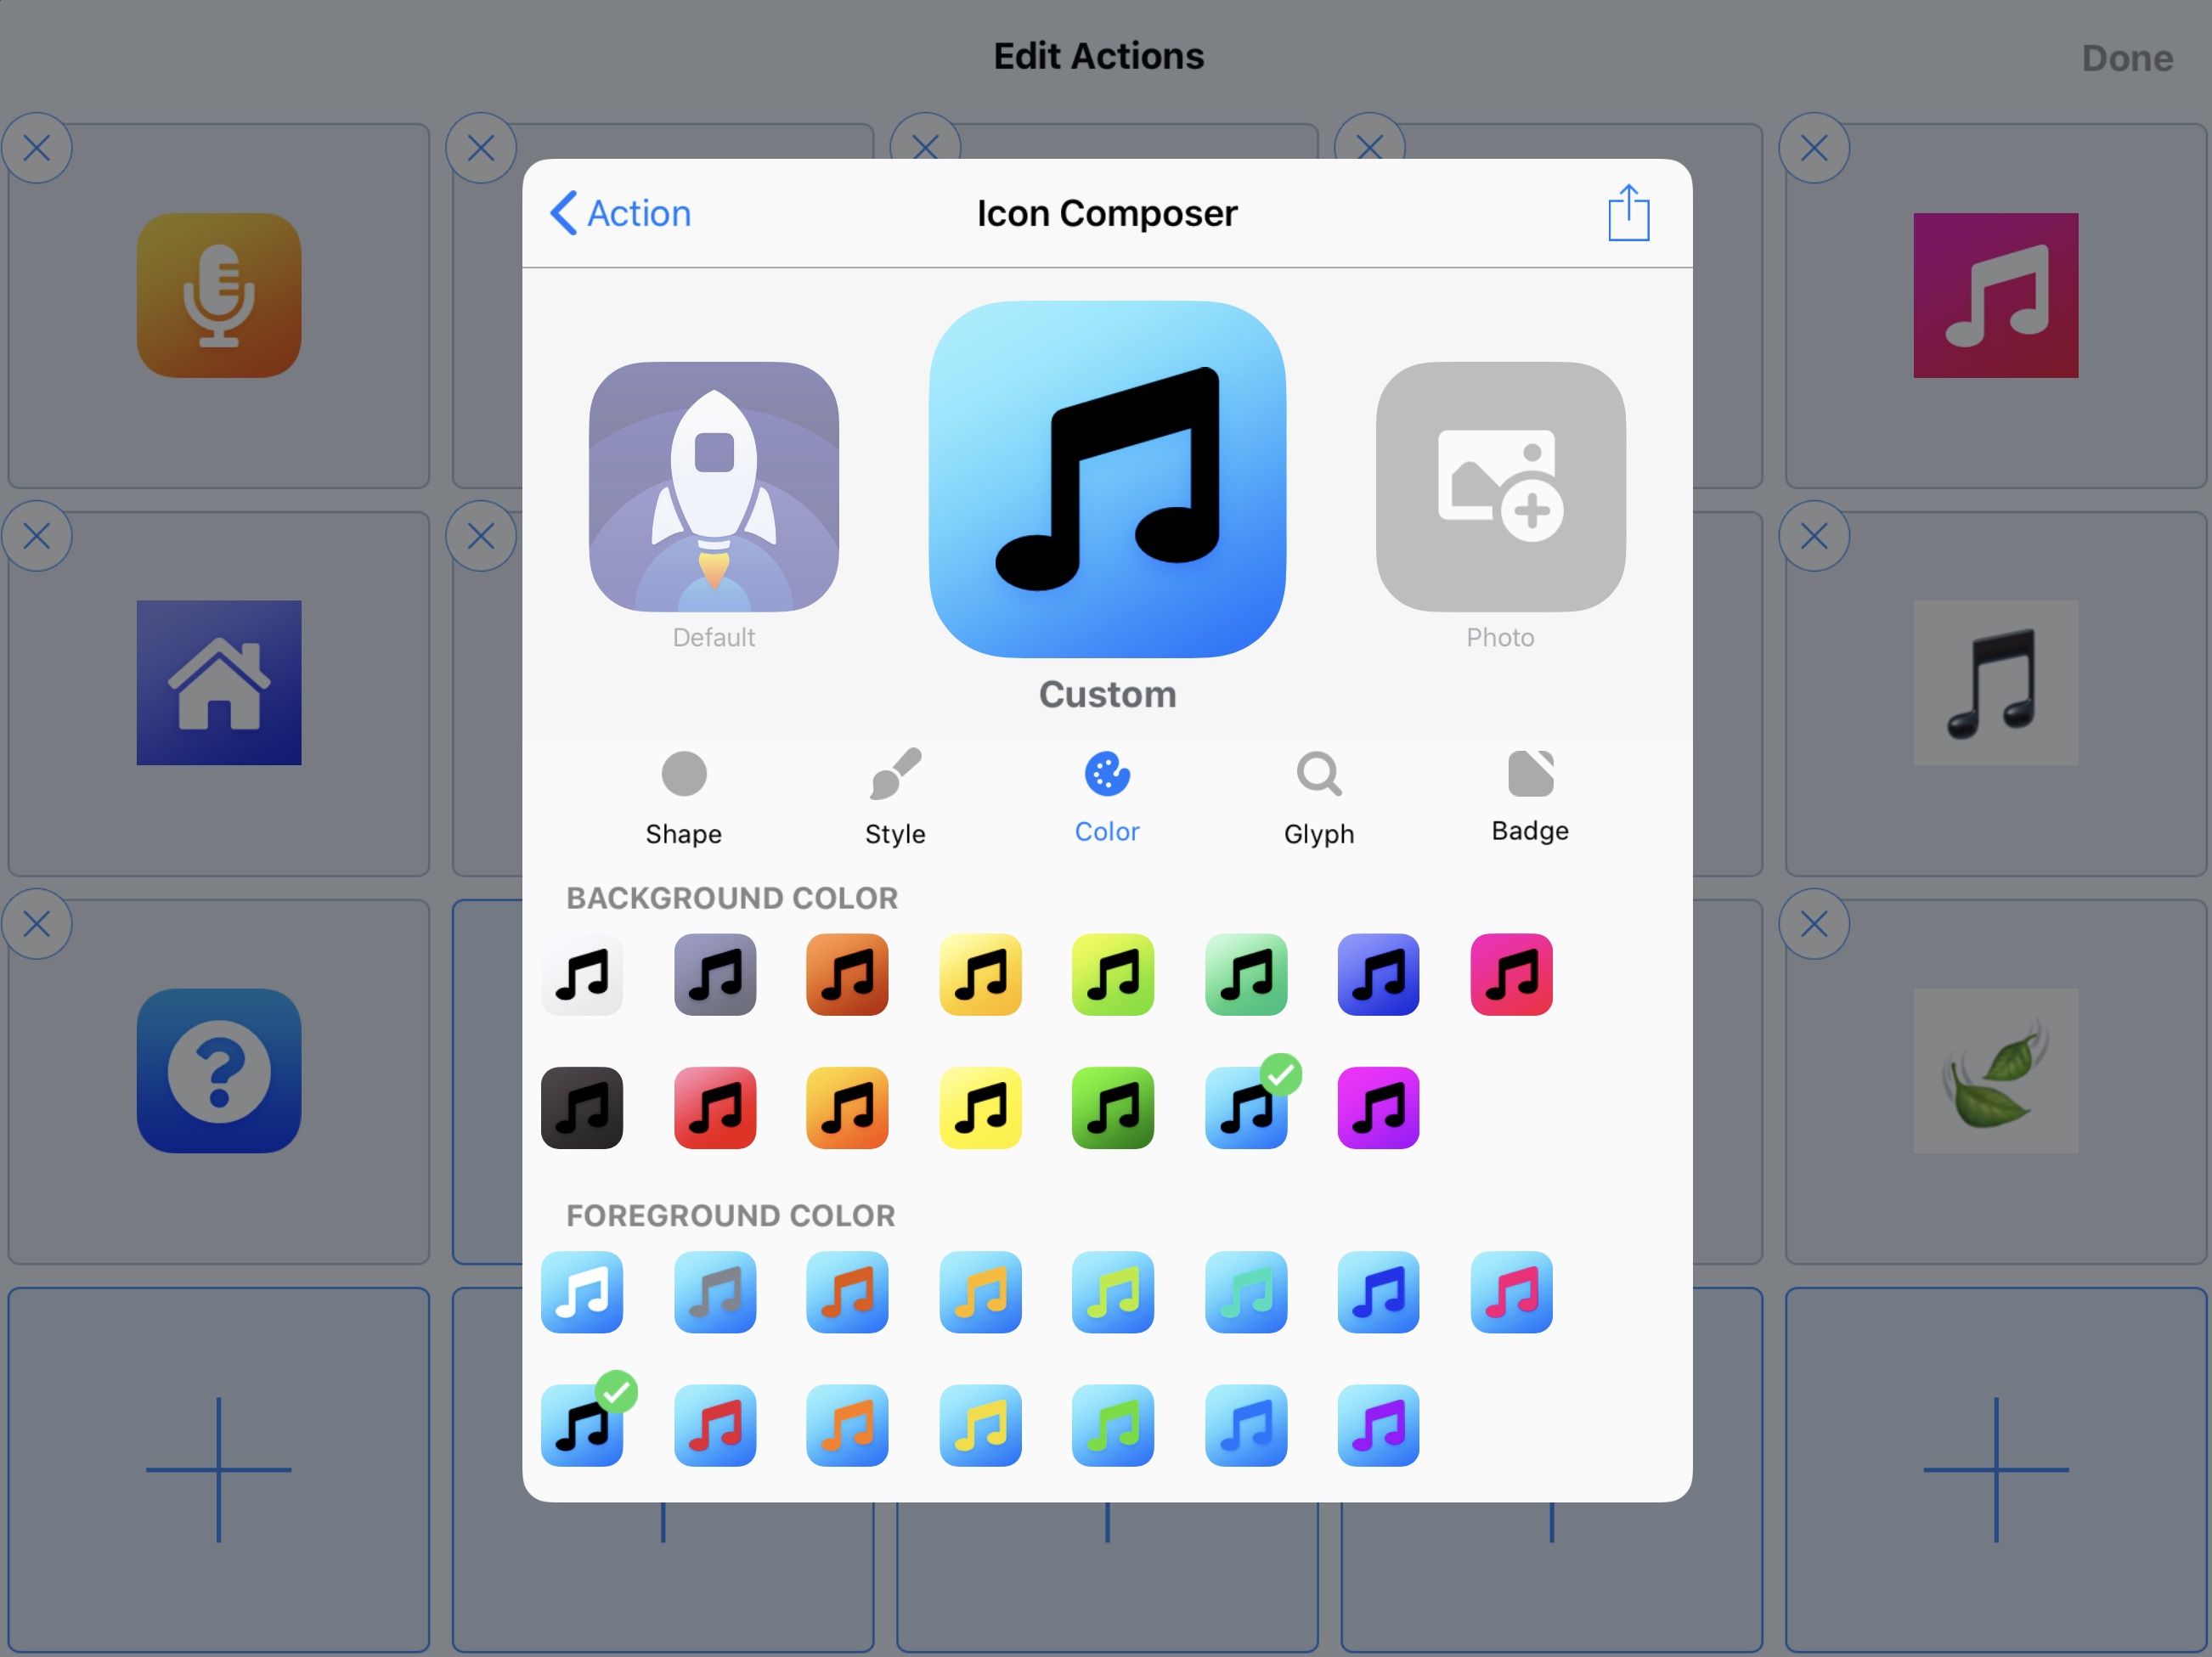 The icon composer's color options.